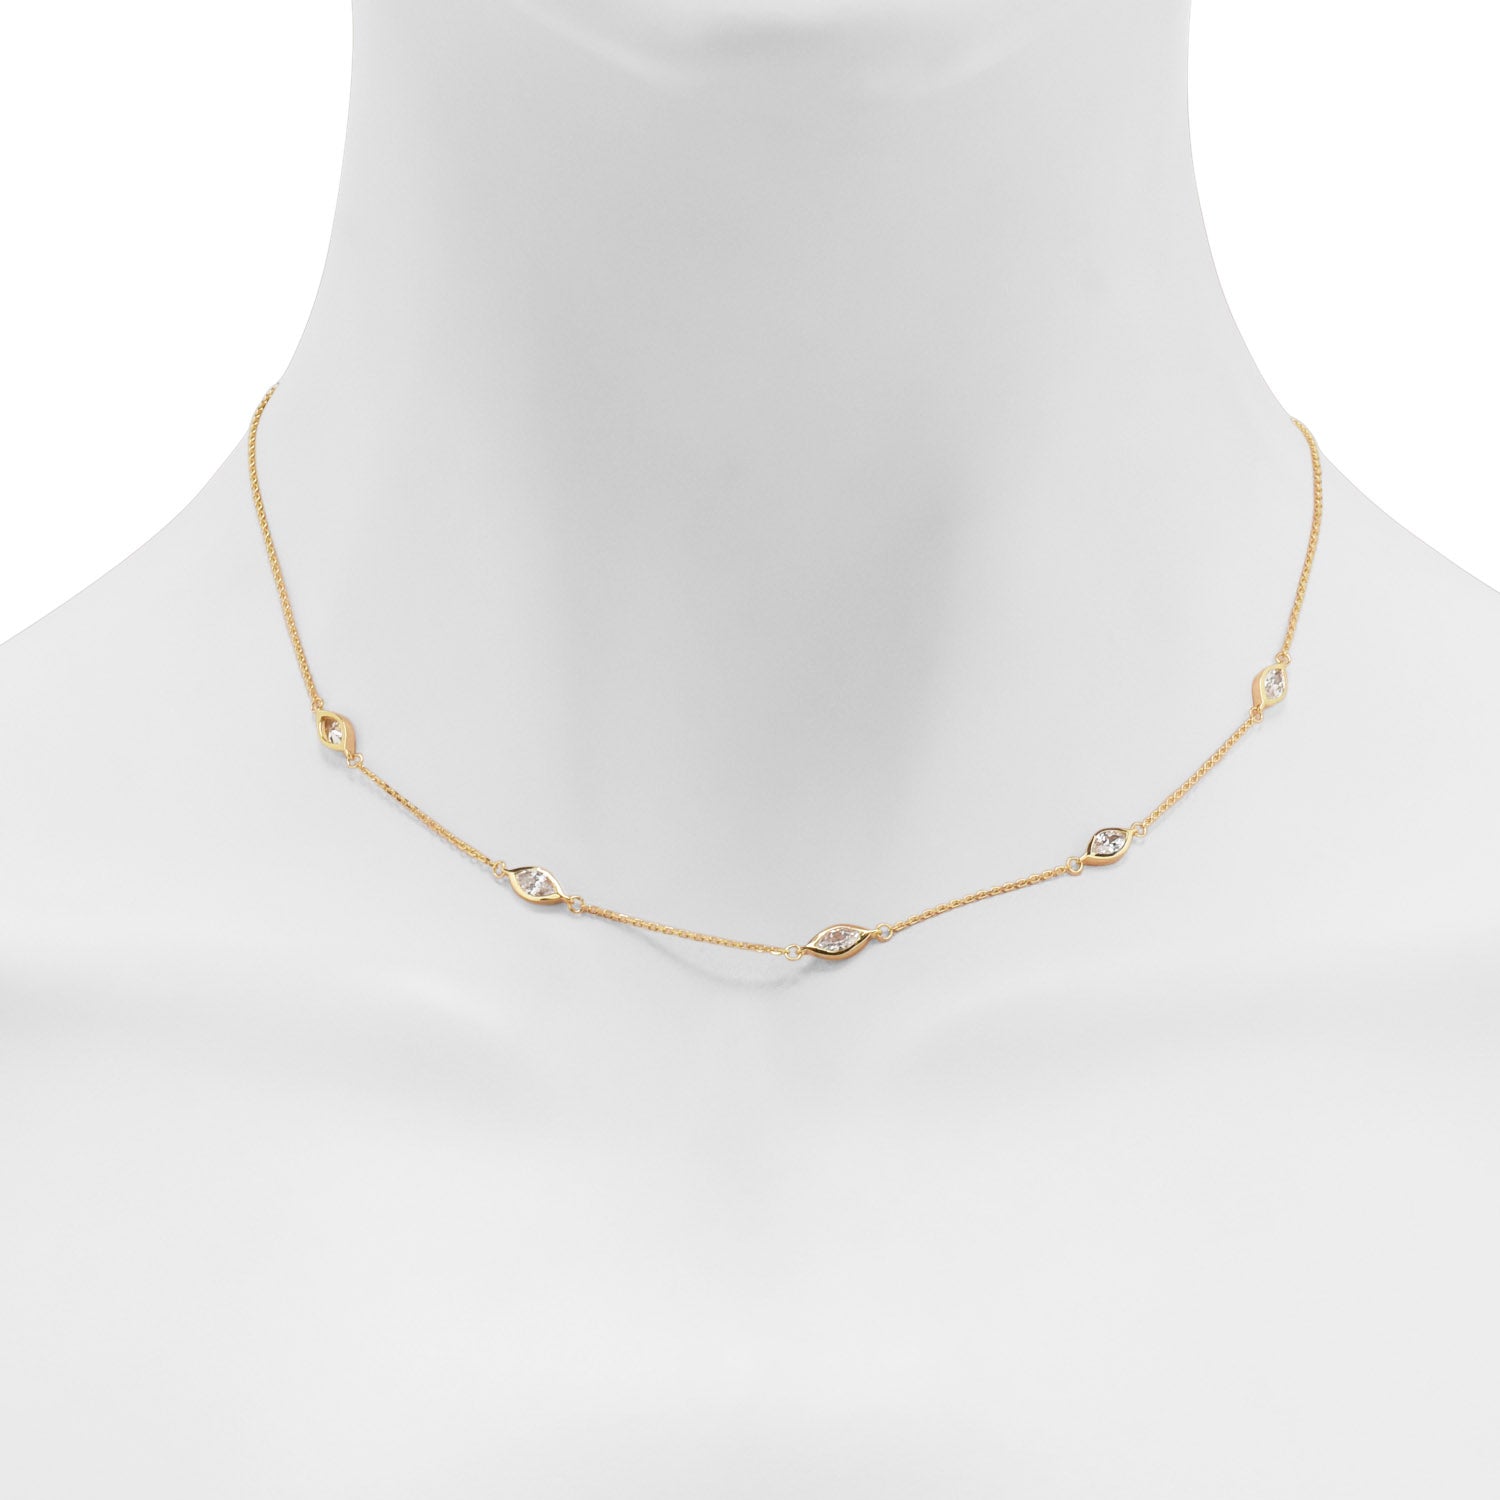 Adjustable Marquise Cubic Zirconia Necklace in 14kt Yellow Gold